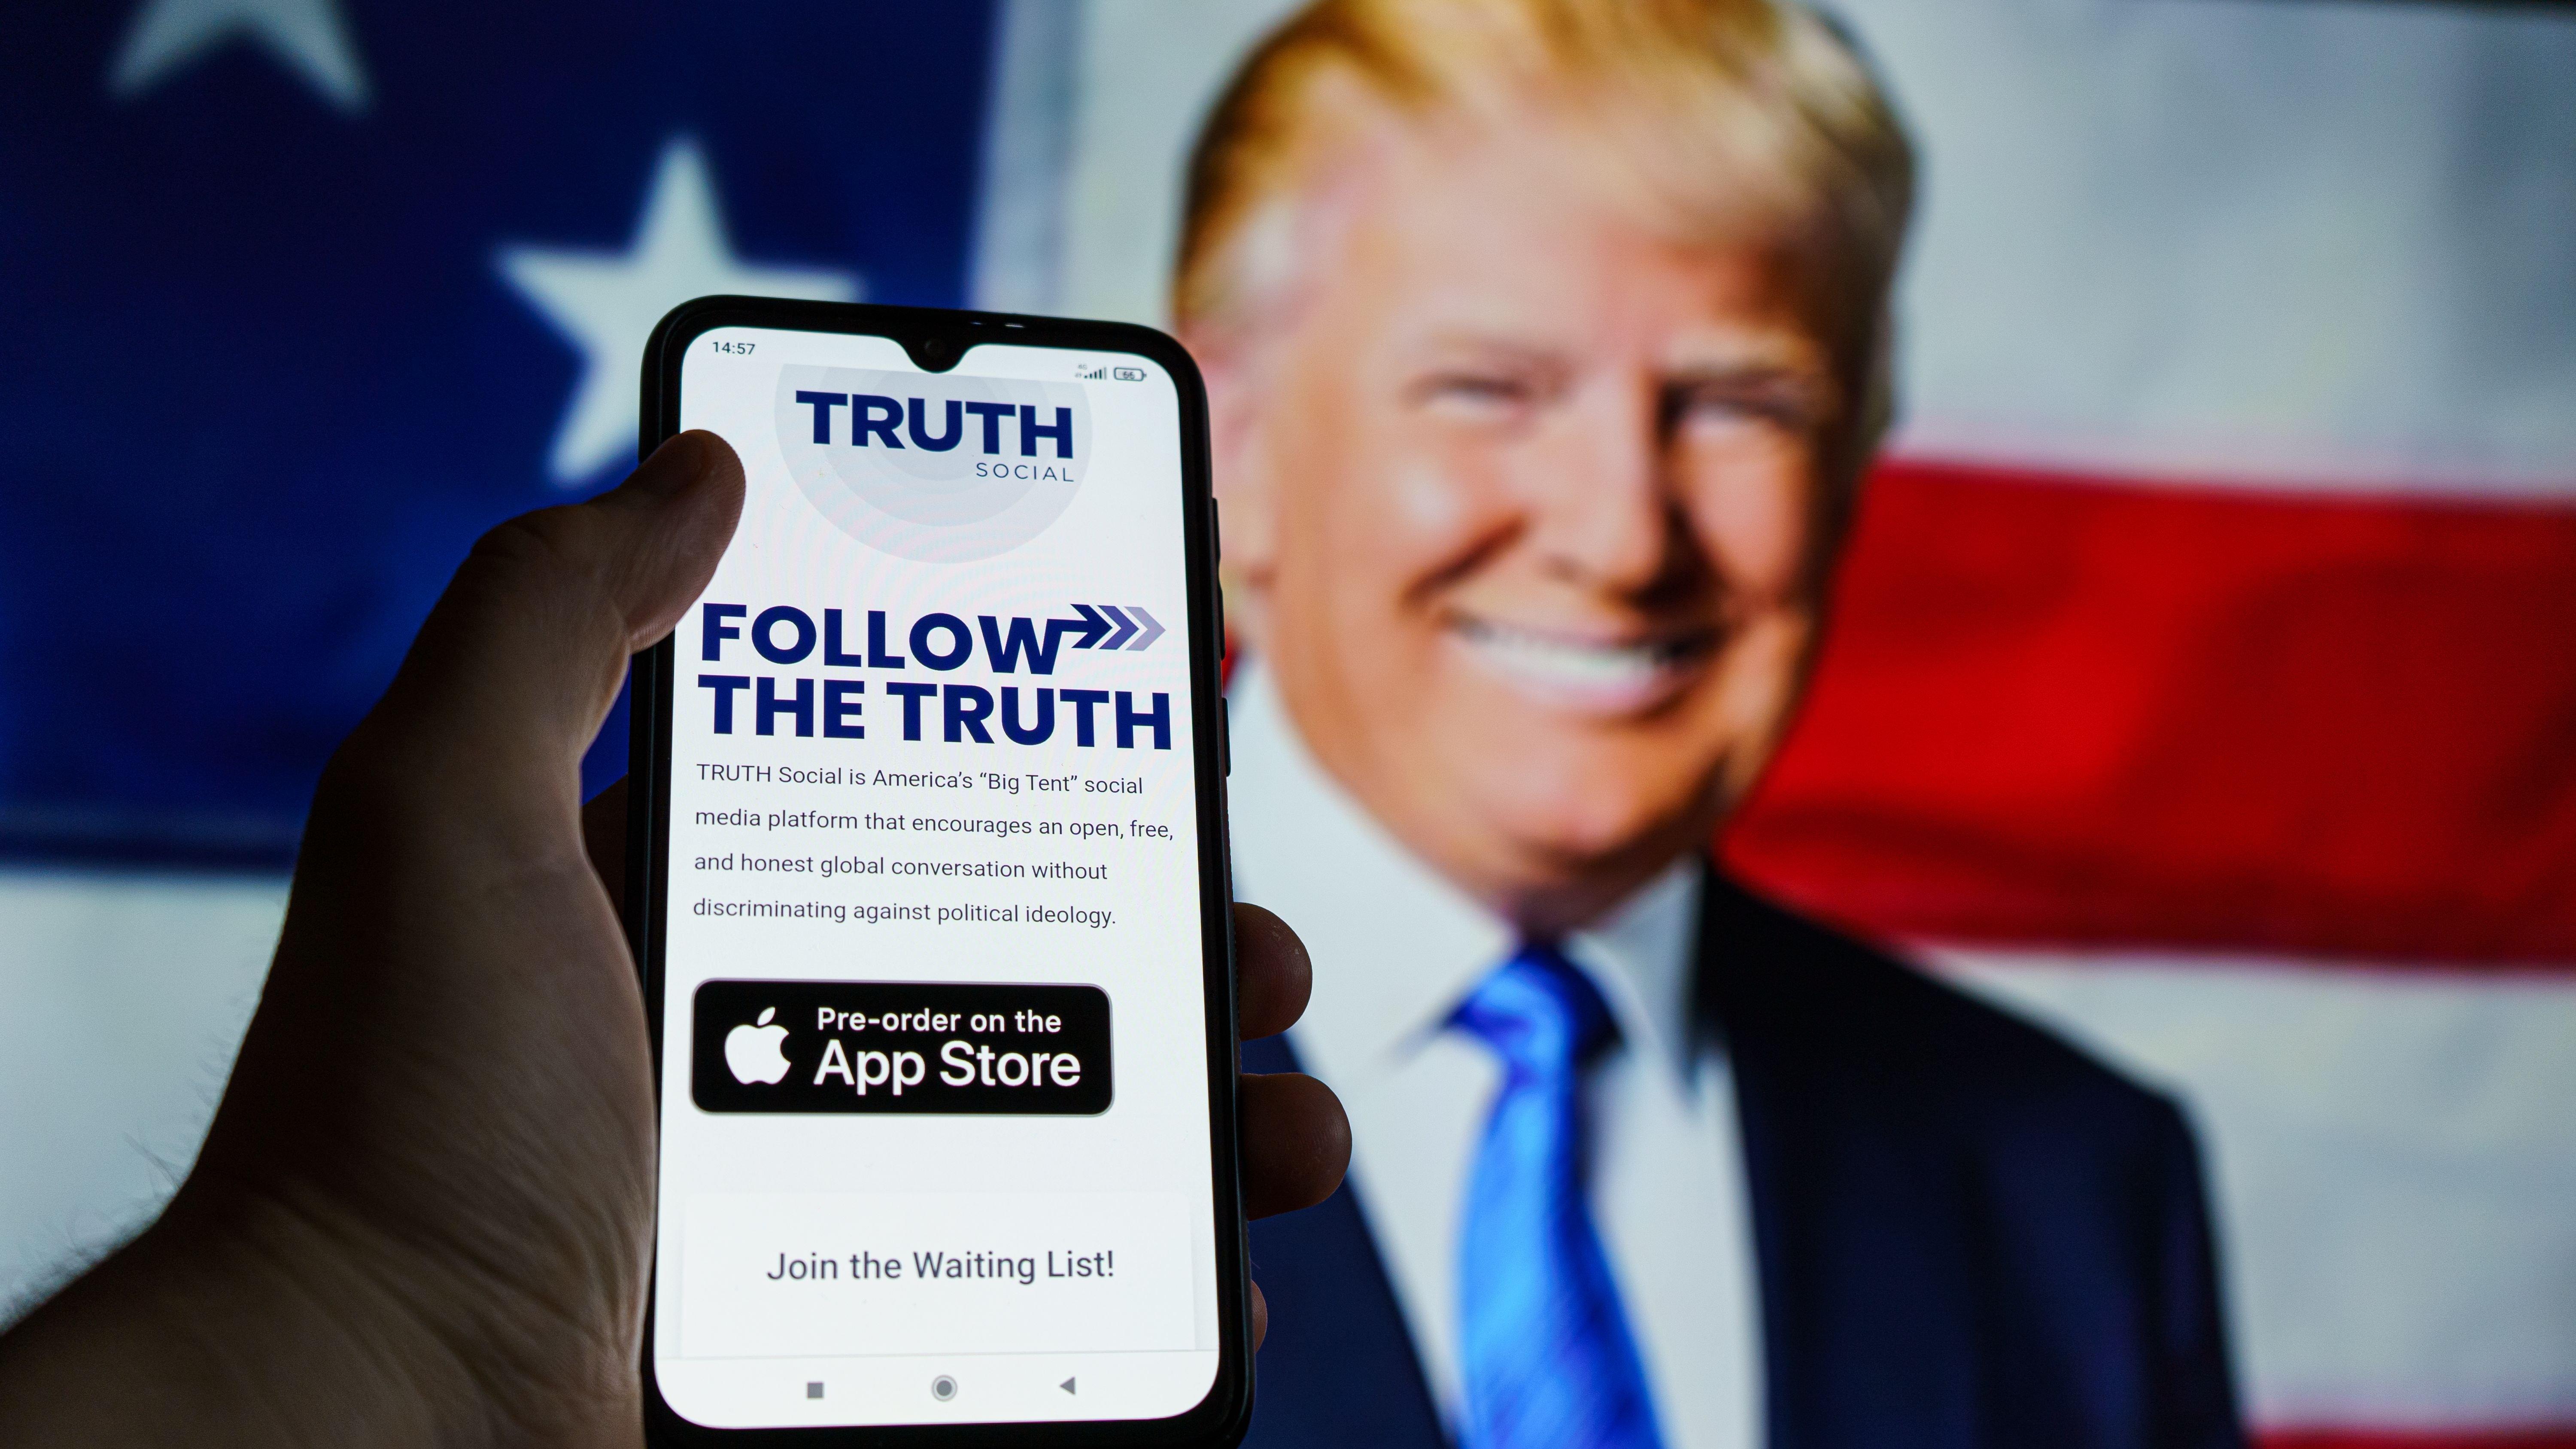 Truth Social app seen on smartphone with Donald Trump in background 